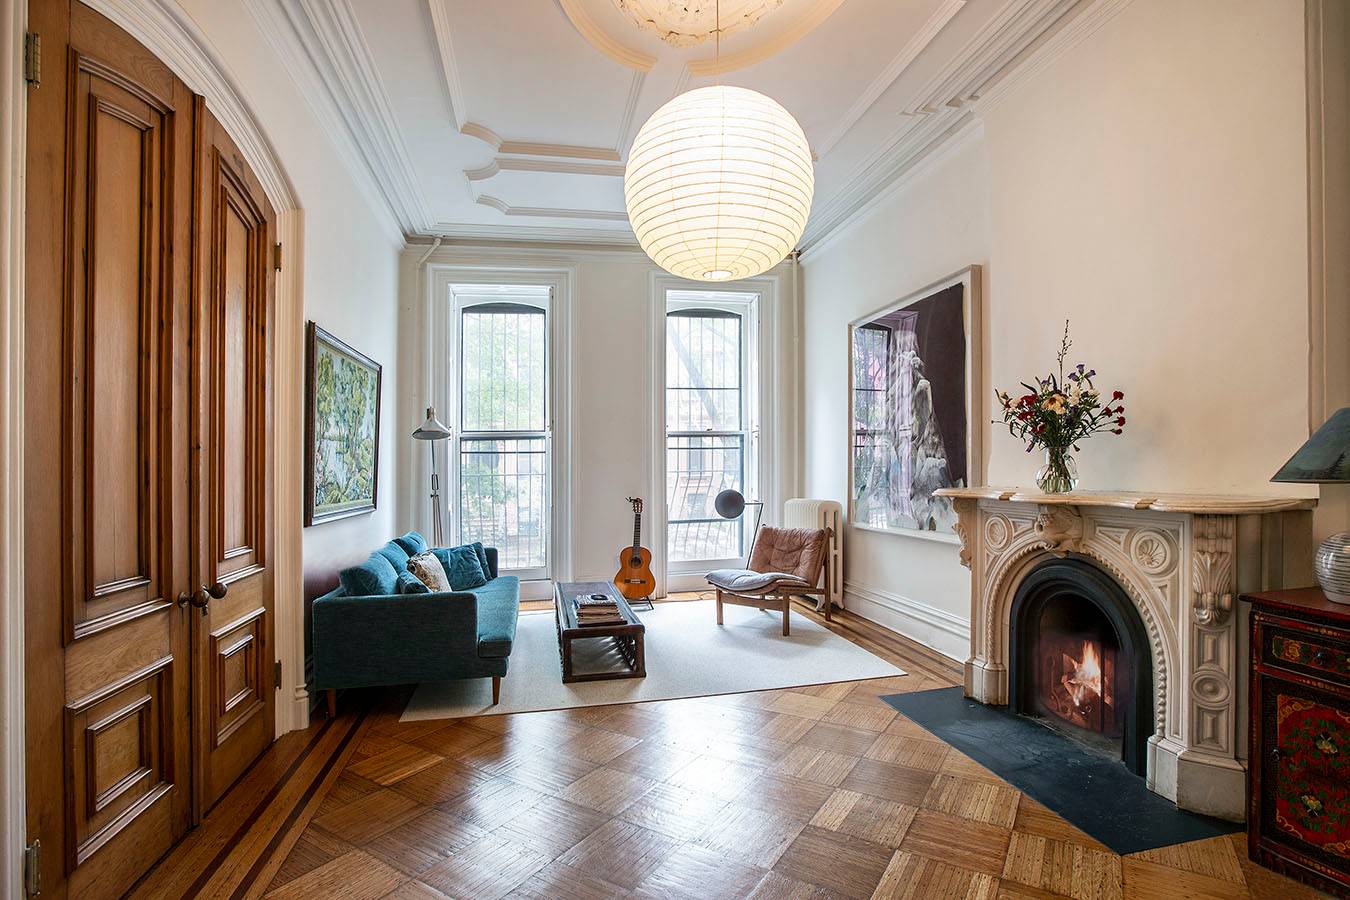 Welcome home to this special brownstone triplex on a quiet block in prime Park Slope just blocks from Grand Army Plaza and Prospect Park.